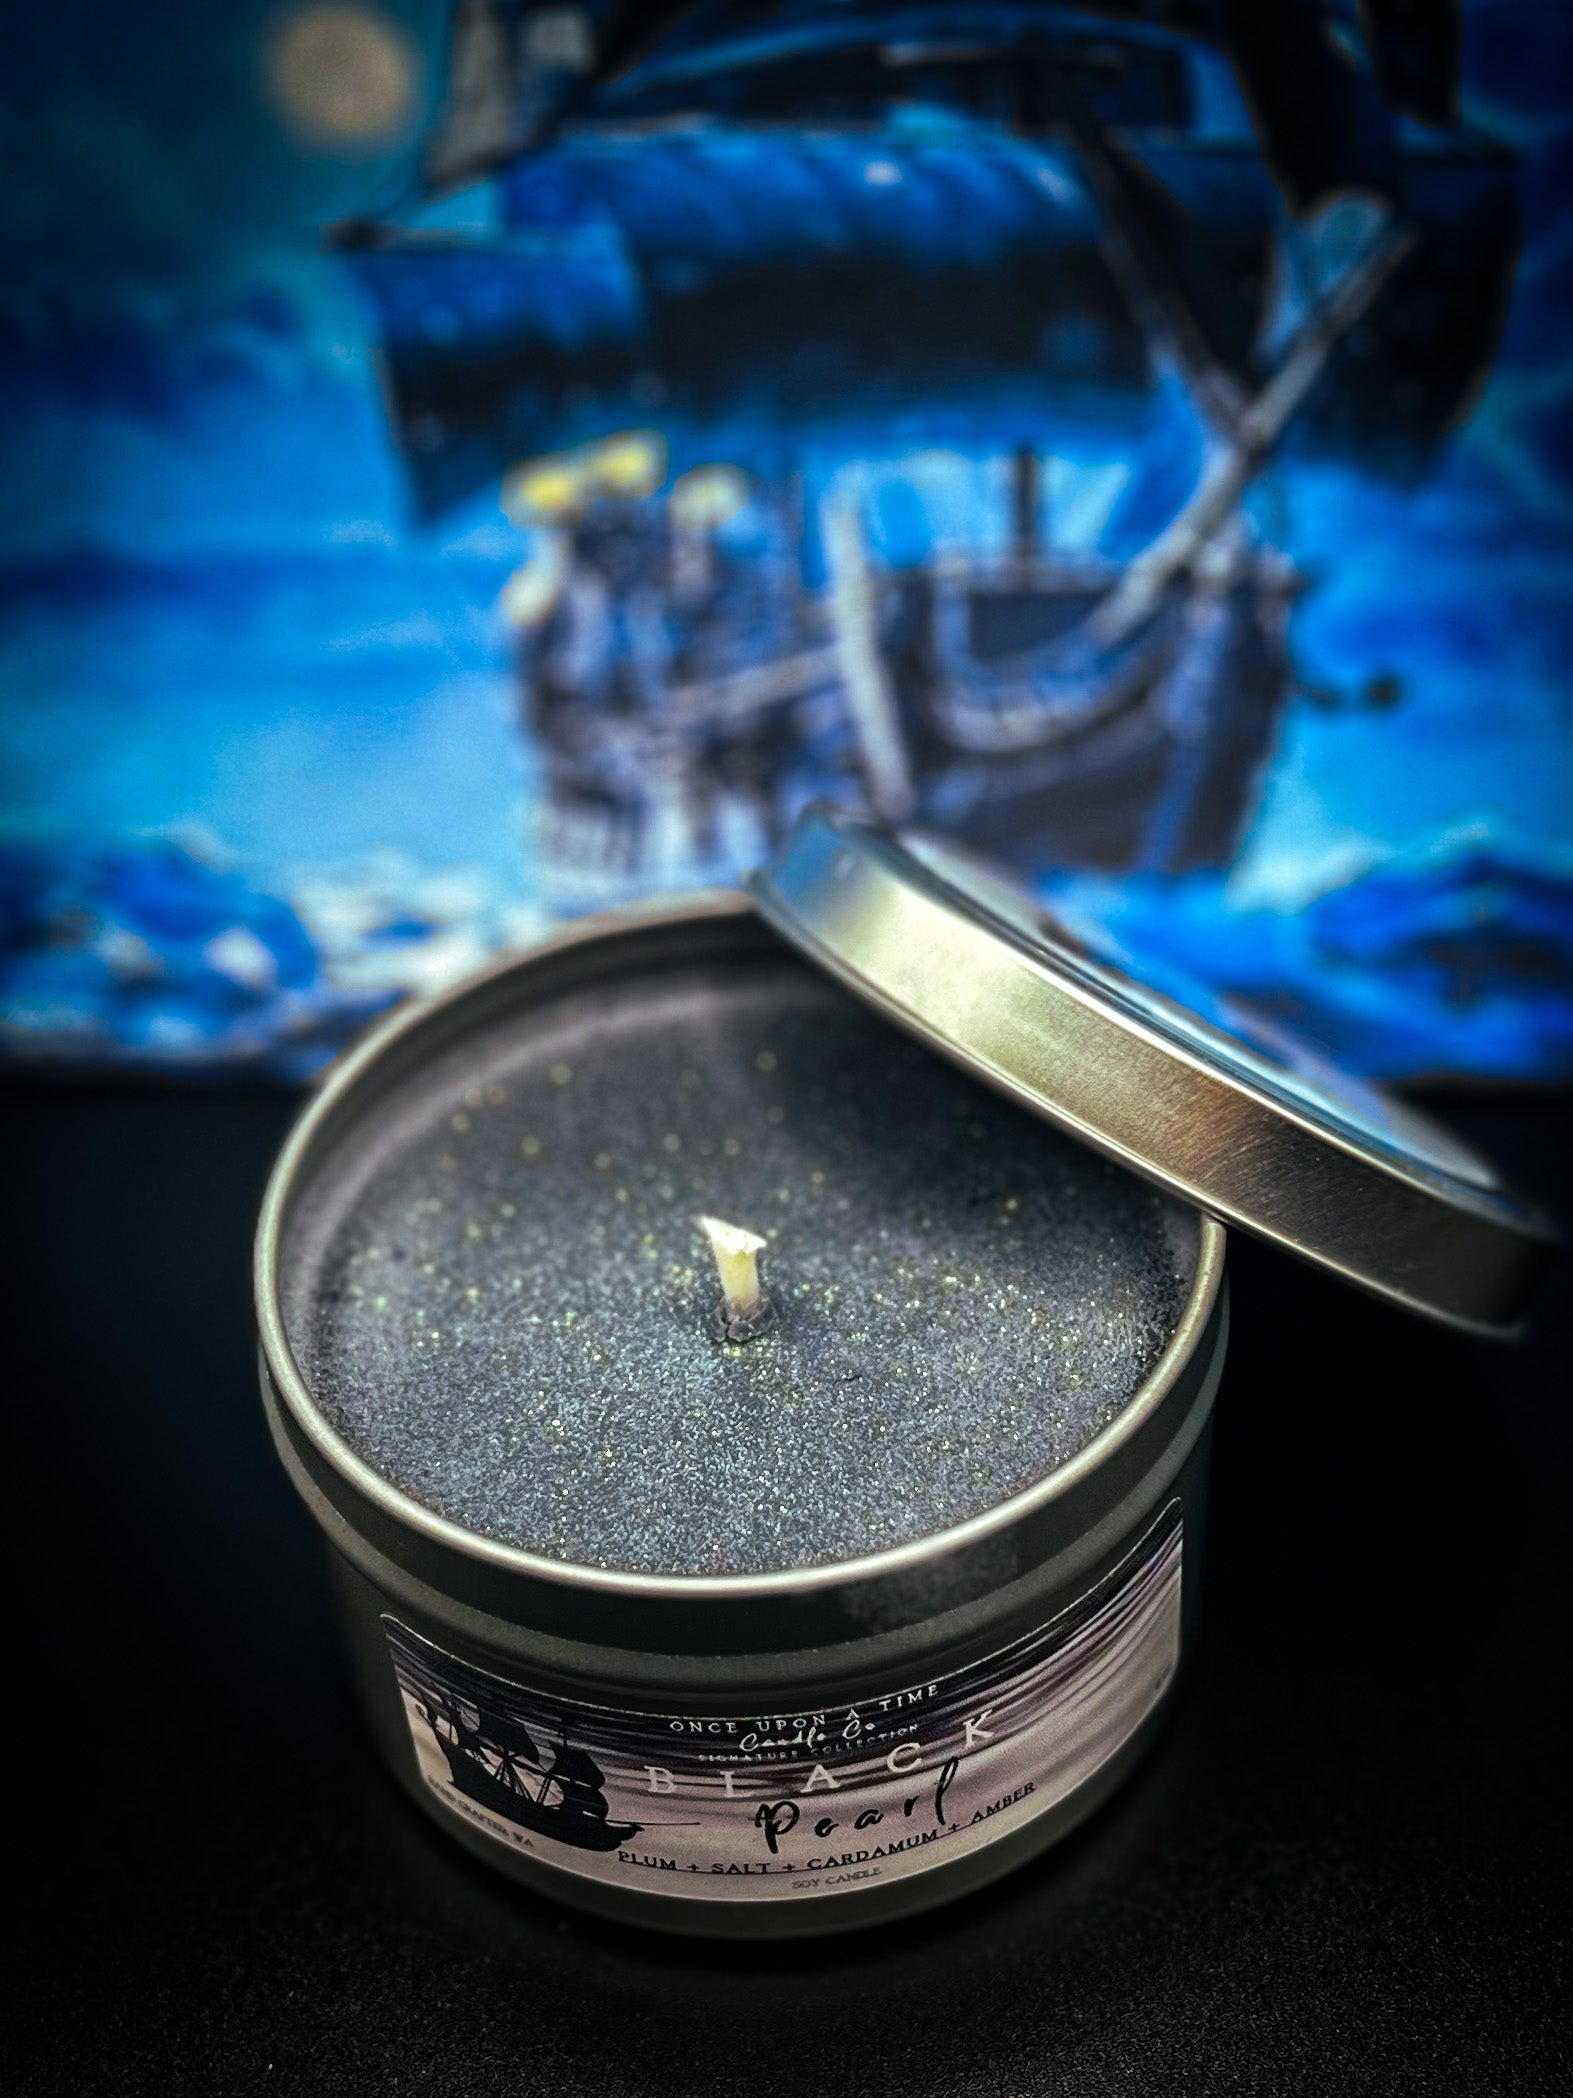 Black Pearls scented candle - Newport